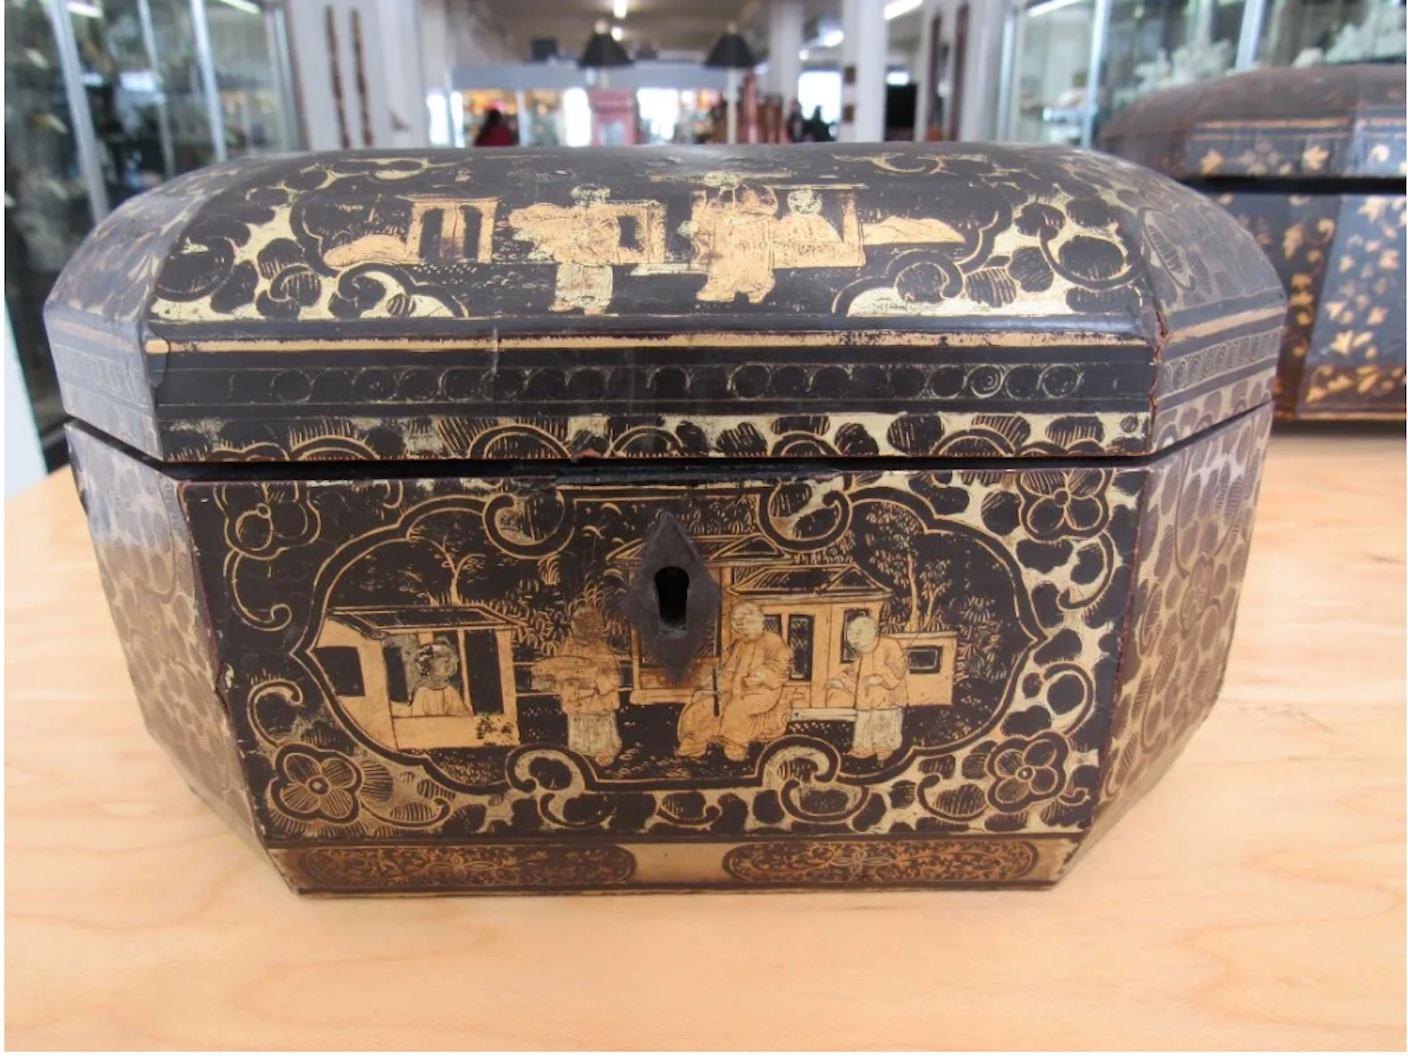 A two Chinese export lacquered tea caddys for The English Market. With two fitted pewter canisters on the interior. Together with a Chinese export lacquered box with remnants of gilt decoration (5 1/2